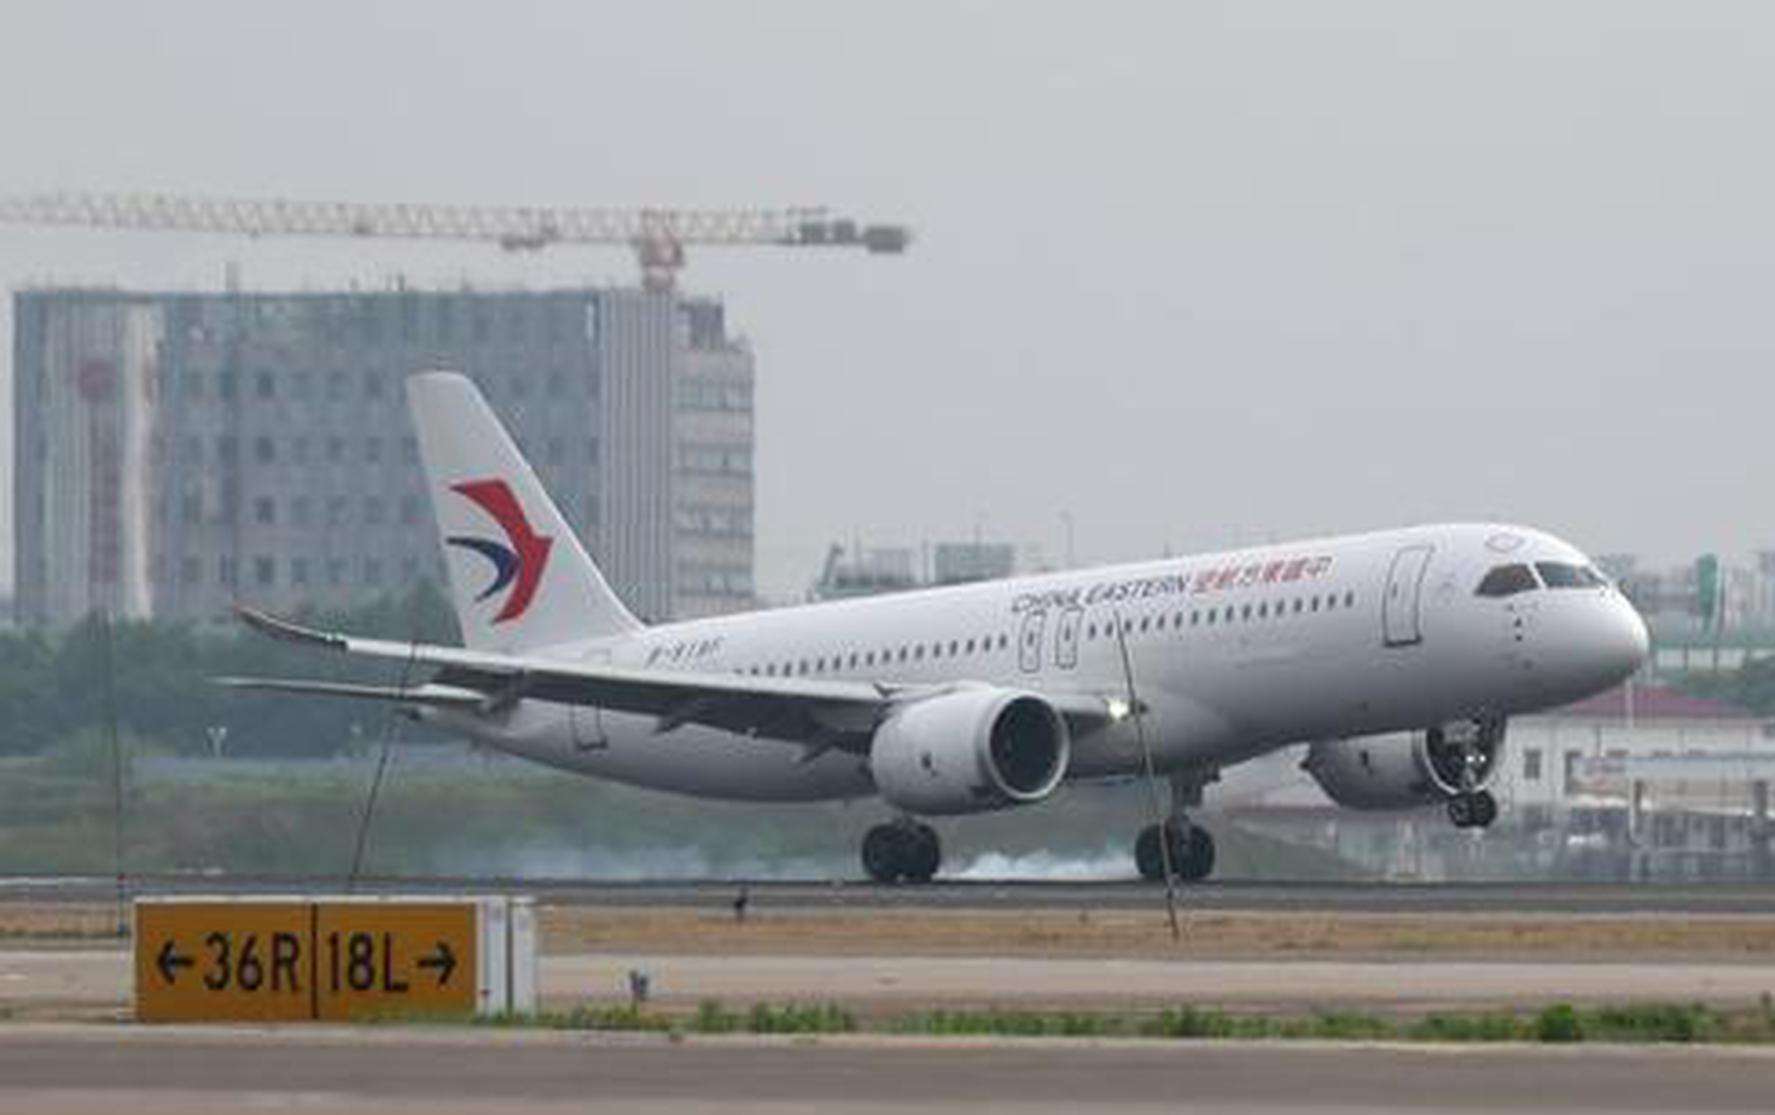 China's C919 and ARJ21 jets complete first sustainable aviation fuel flights